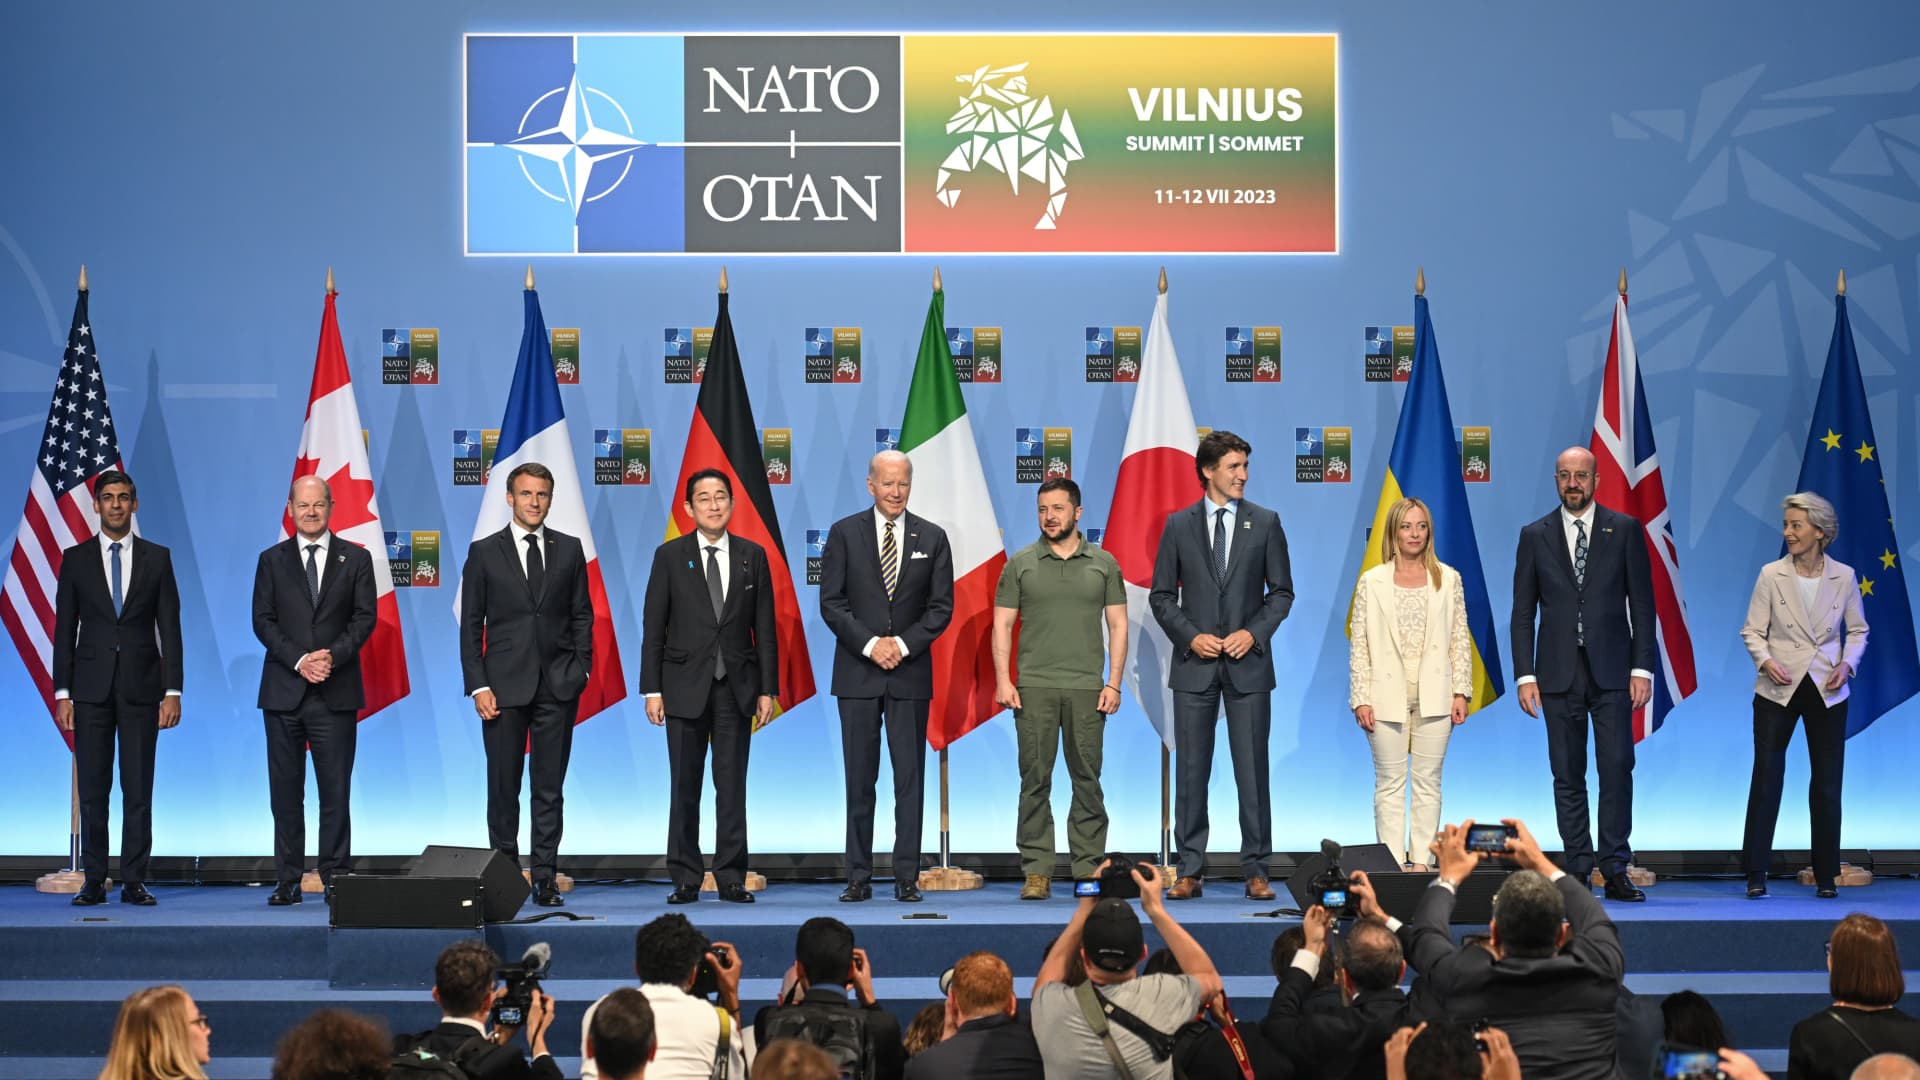 The Leaders of the Group of Seven (G7), reaffirm our unwavering commitment to the strategic objective of a free, independent, democratic, and sovereign Ukraine, within its internationally recognized borders, capable of defending itself and deterring future aggression. at the 2023 NATO Summit seen next to the Main Media Center, in Vilnius, Lithuania, in Vilnius, Lithuania, on July 12, 2023.